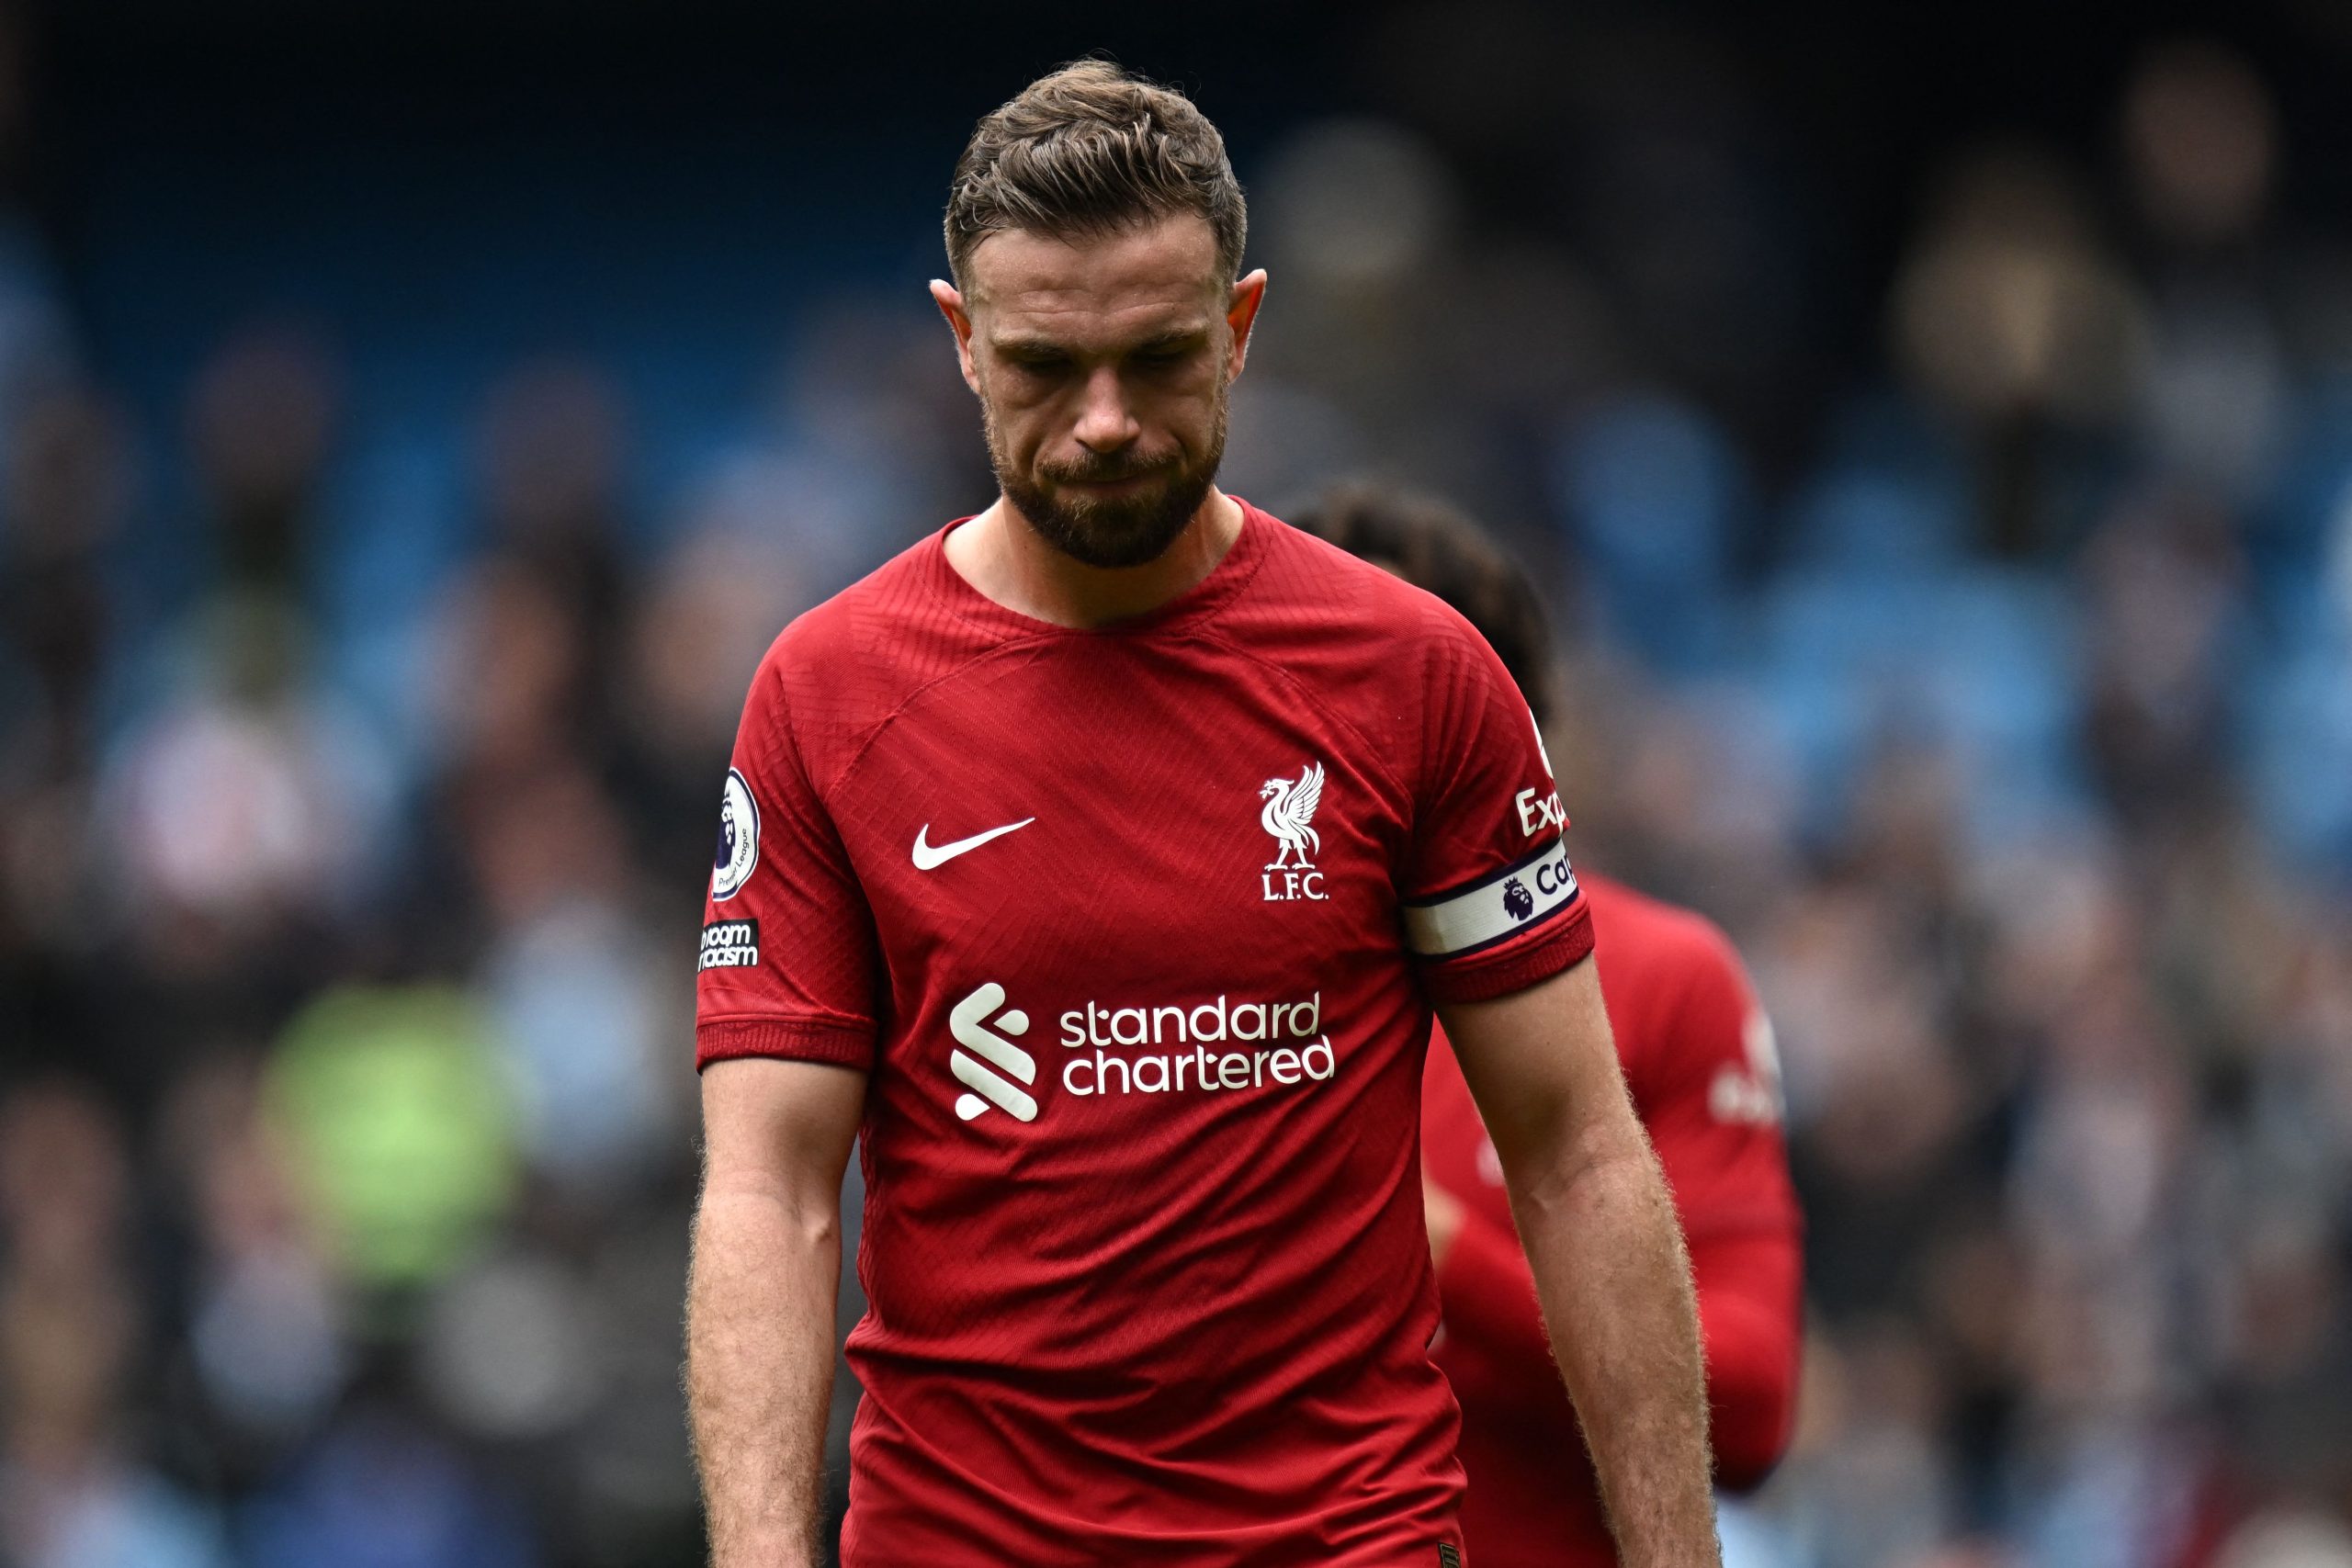 Henderson will be hated by the LGBTQ community -- Carragher